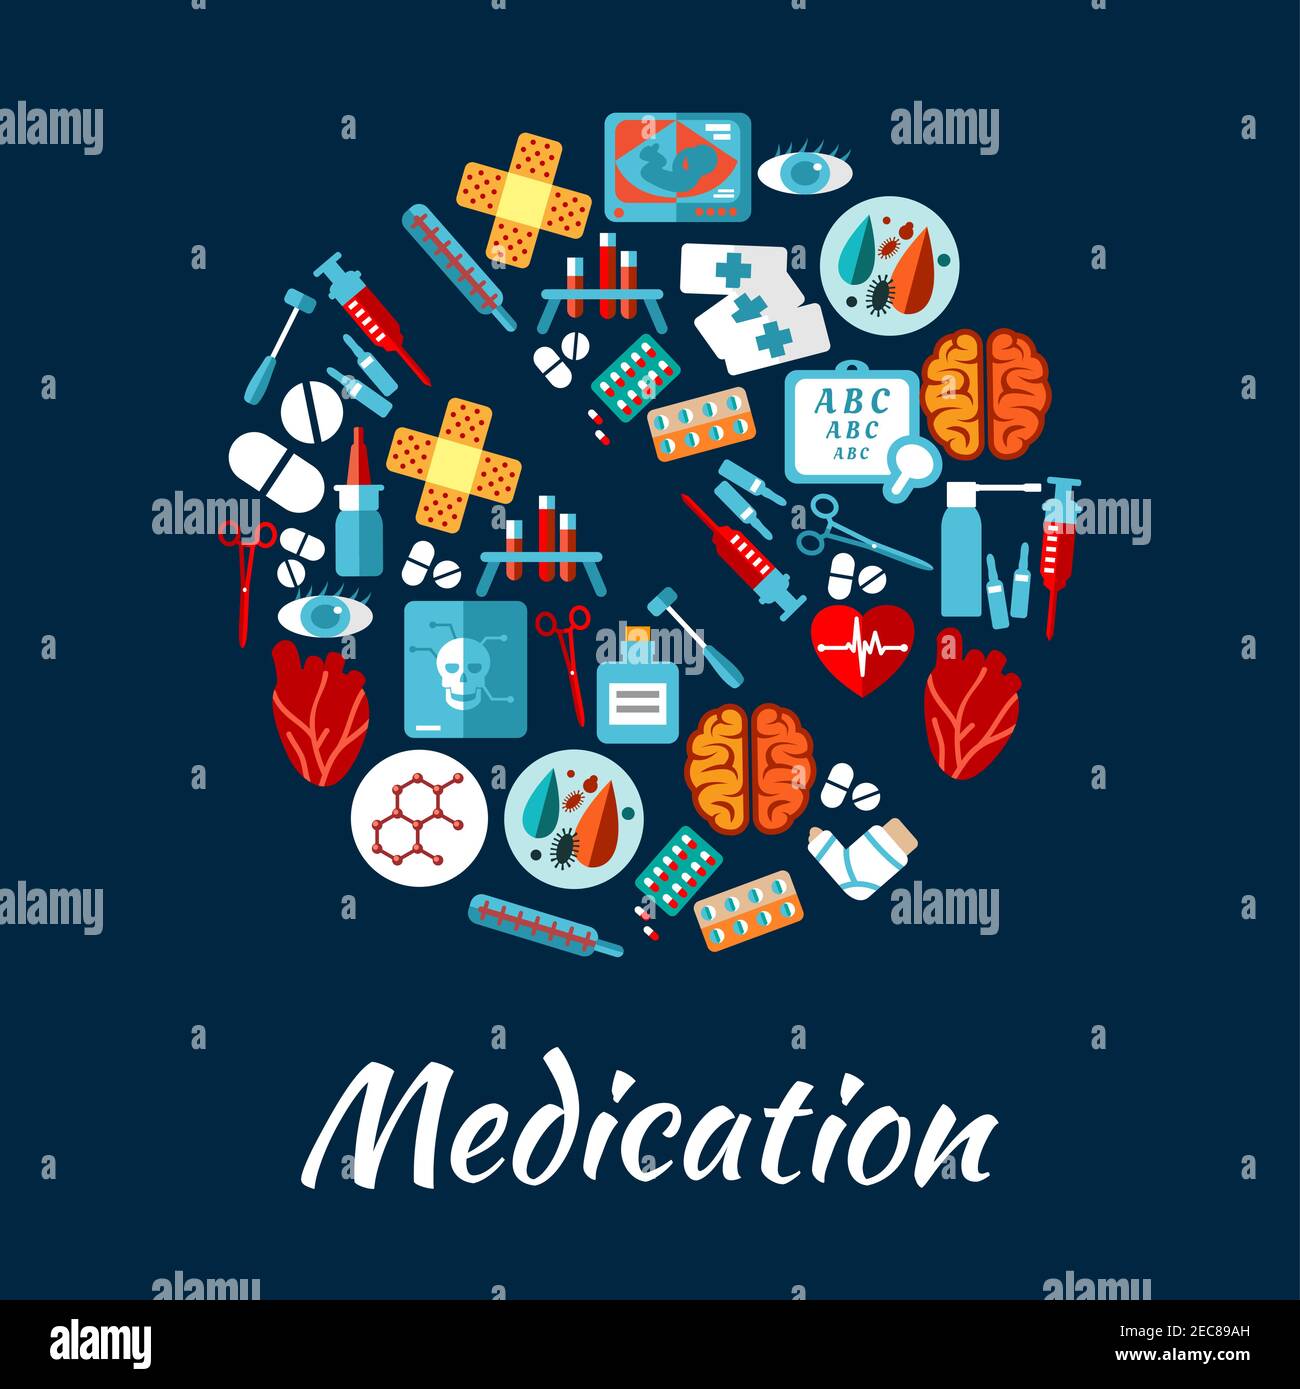 Medication and medical equipment icons in a shape of a pill with syringe, thermometer, drug, heart, brain, eye, blood test tube, skull x-ray, baby ult Stock Vector